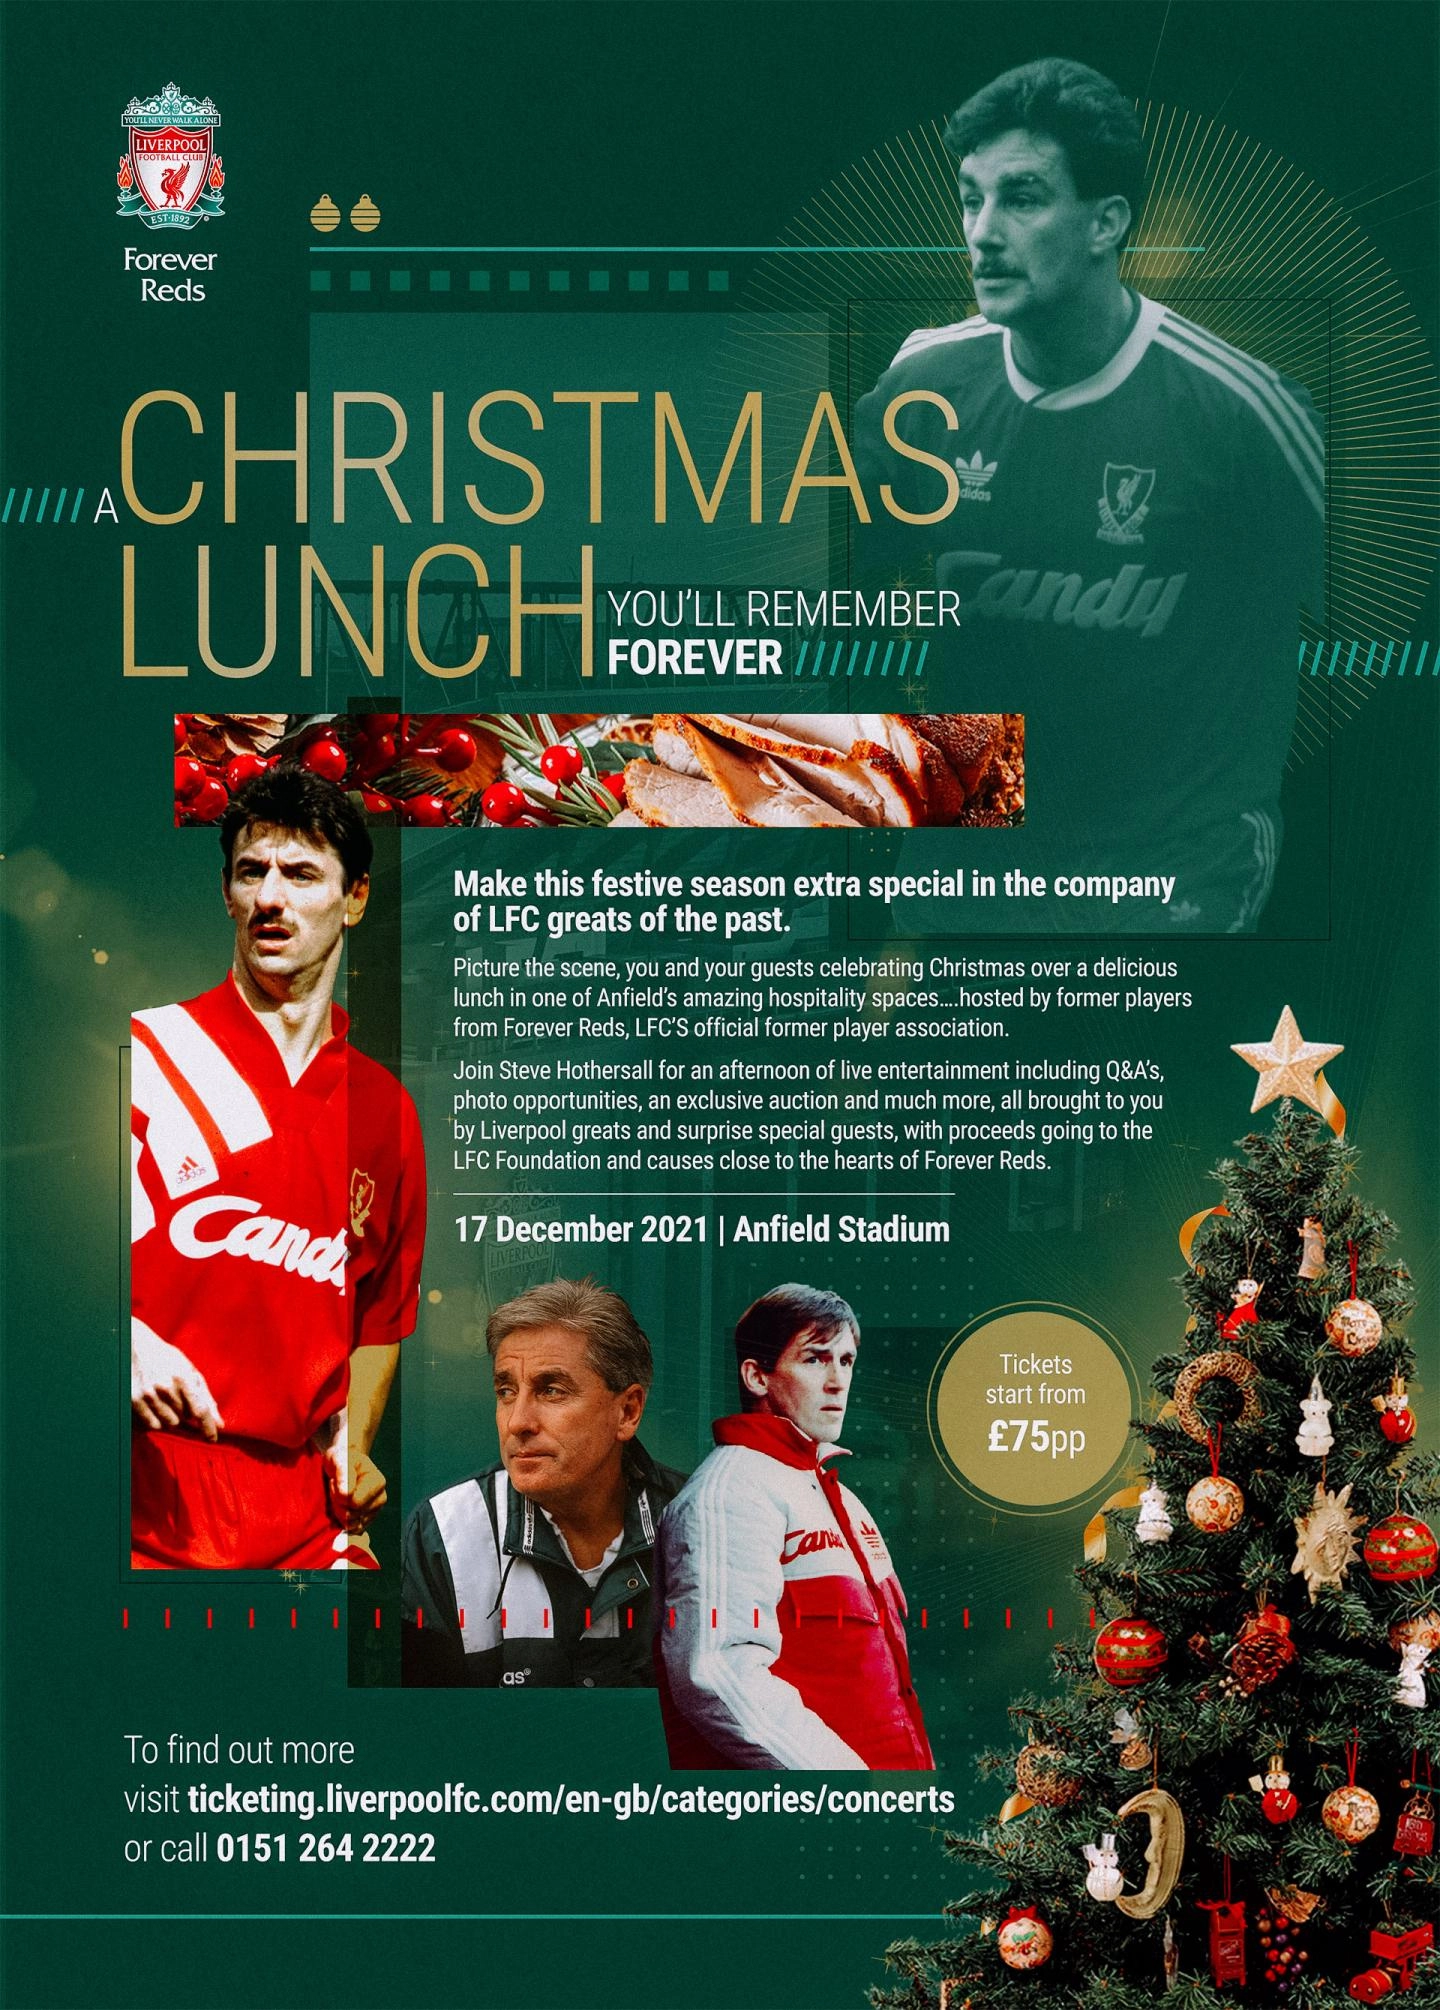 Tickets to the Forever Reds Christmas Lunch Liverpool FC